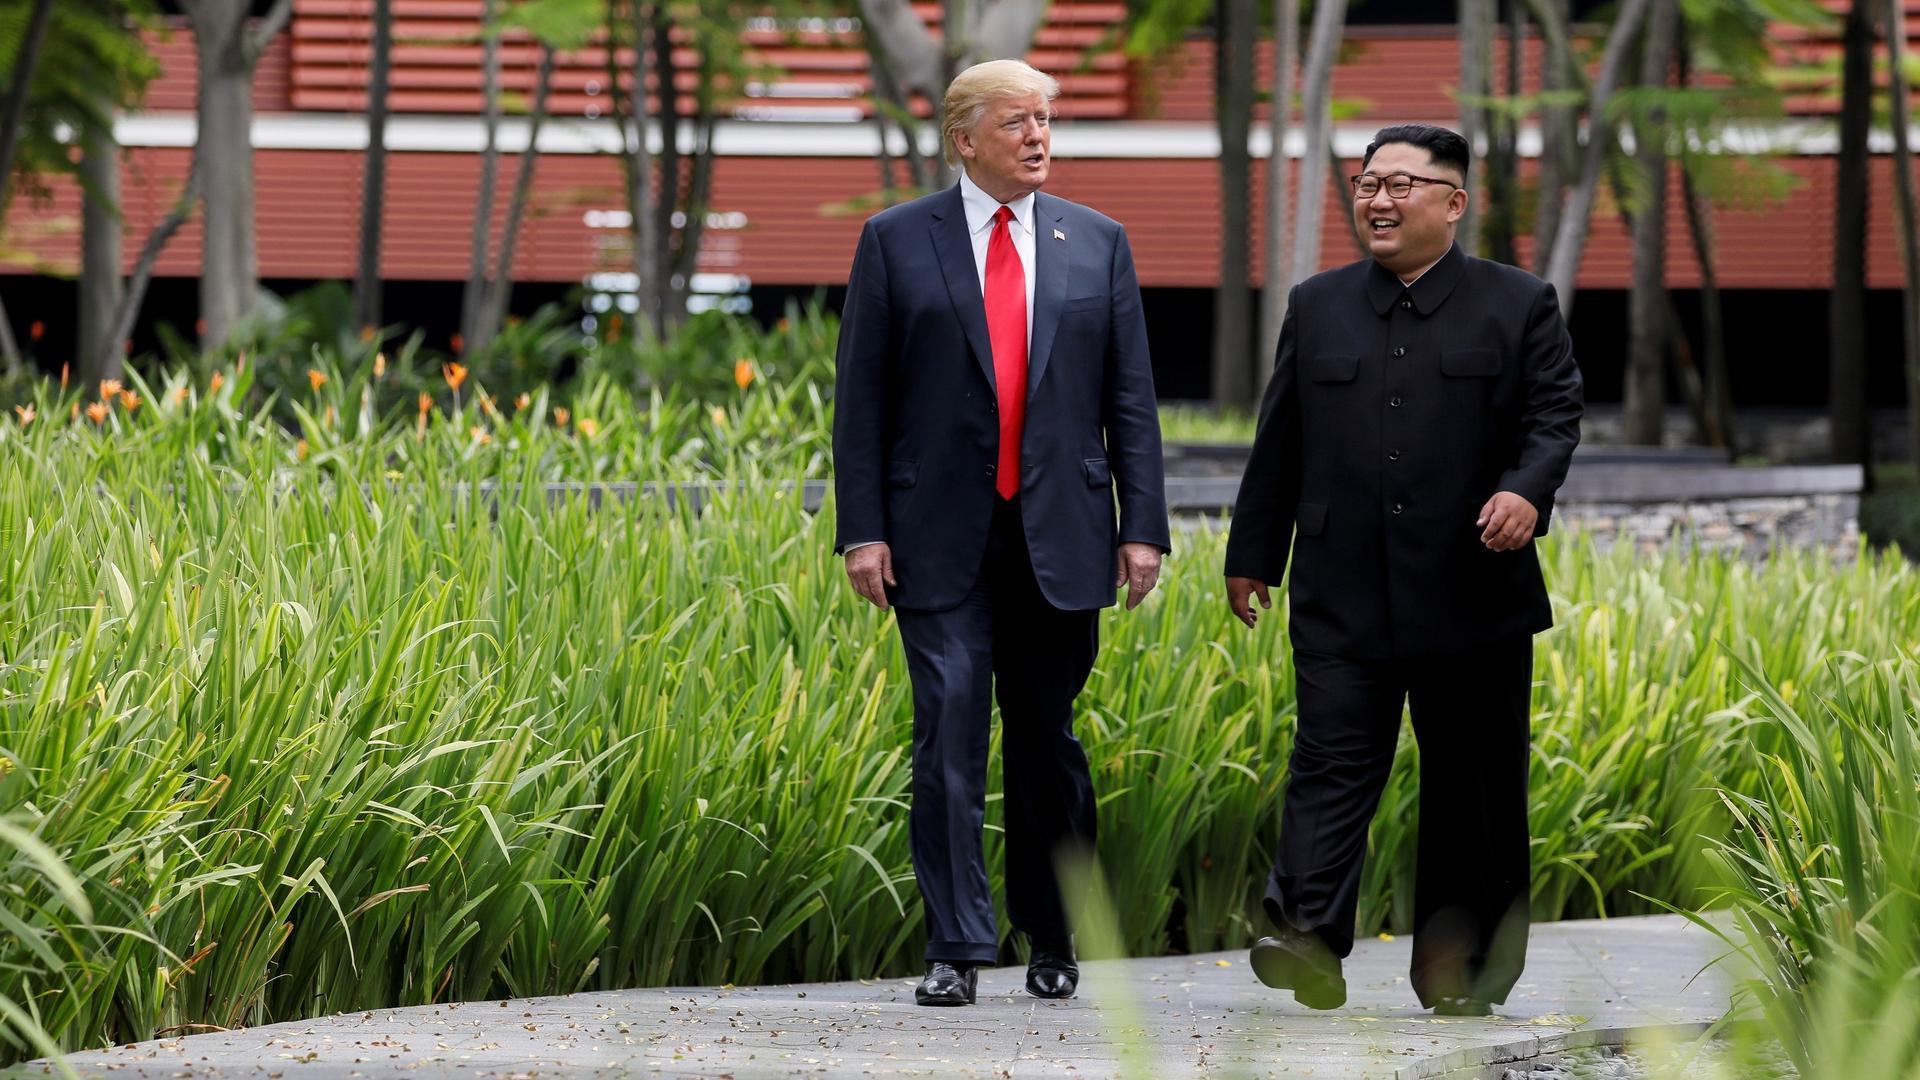 President Donald Trump and North Korea's leader Kim Jong-un walk together before their working lunch during their summit at the Capella Hotel on the resort island of Sentosa, Singapore on June 12, 2018. 